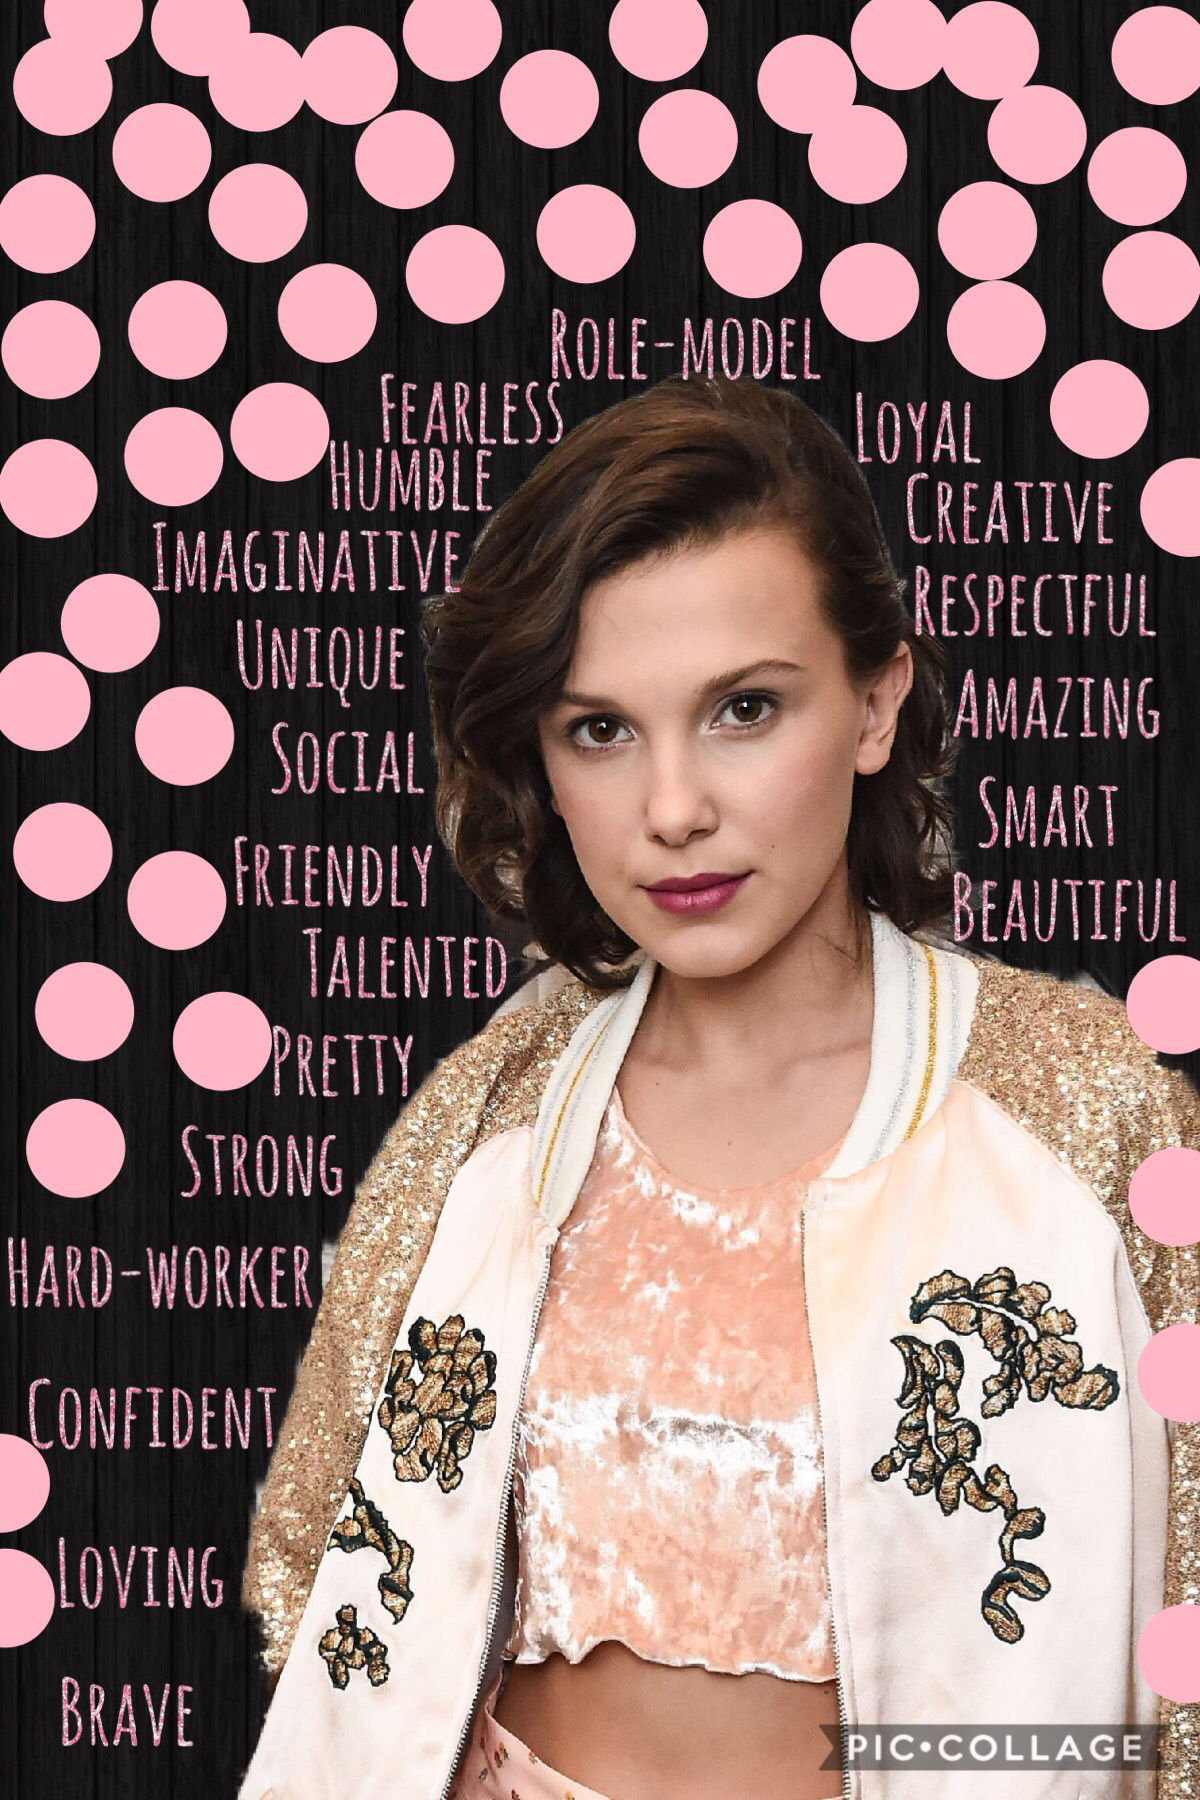 Millie Bobby Brown, my role model